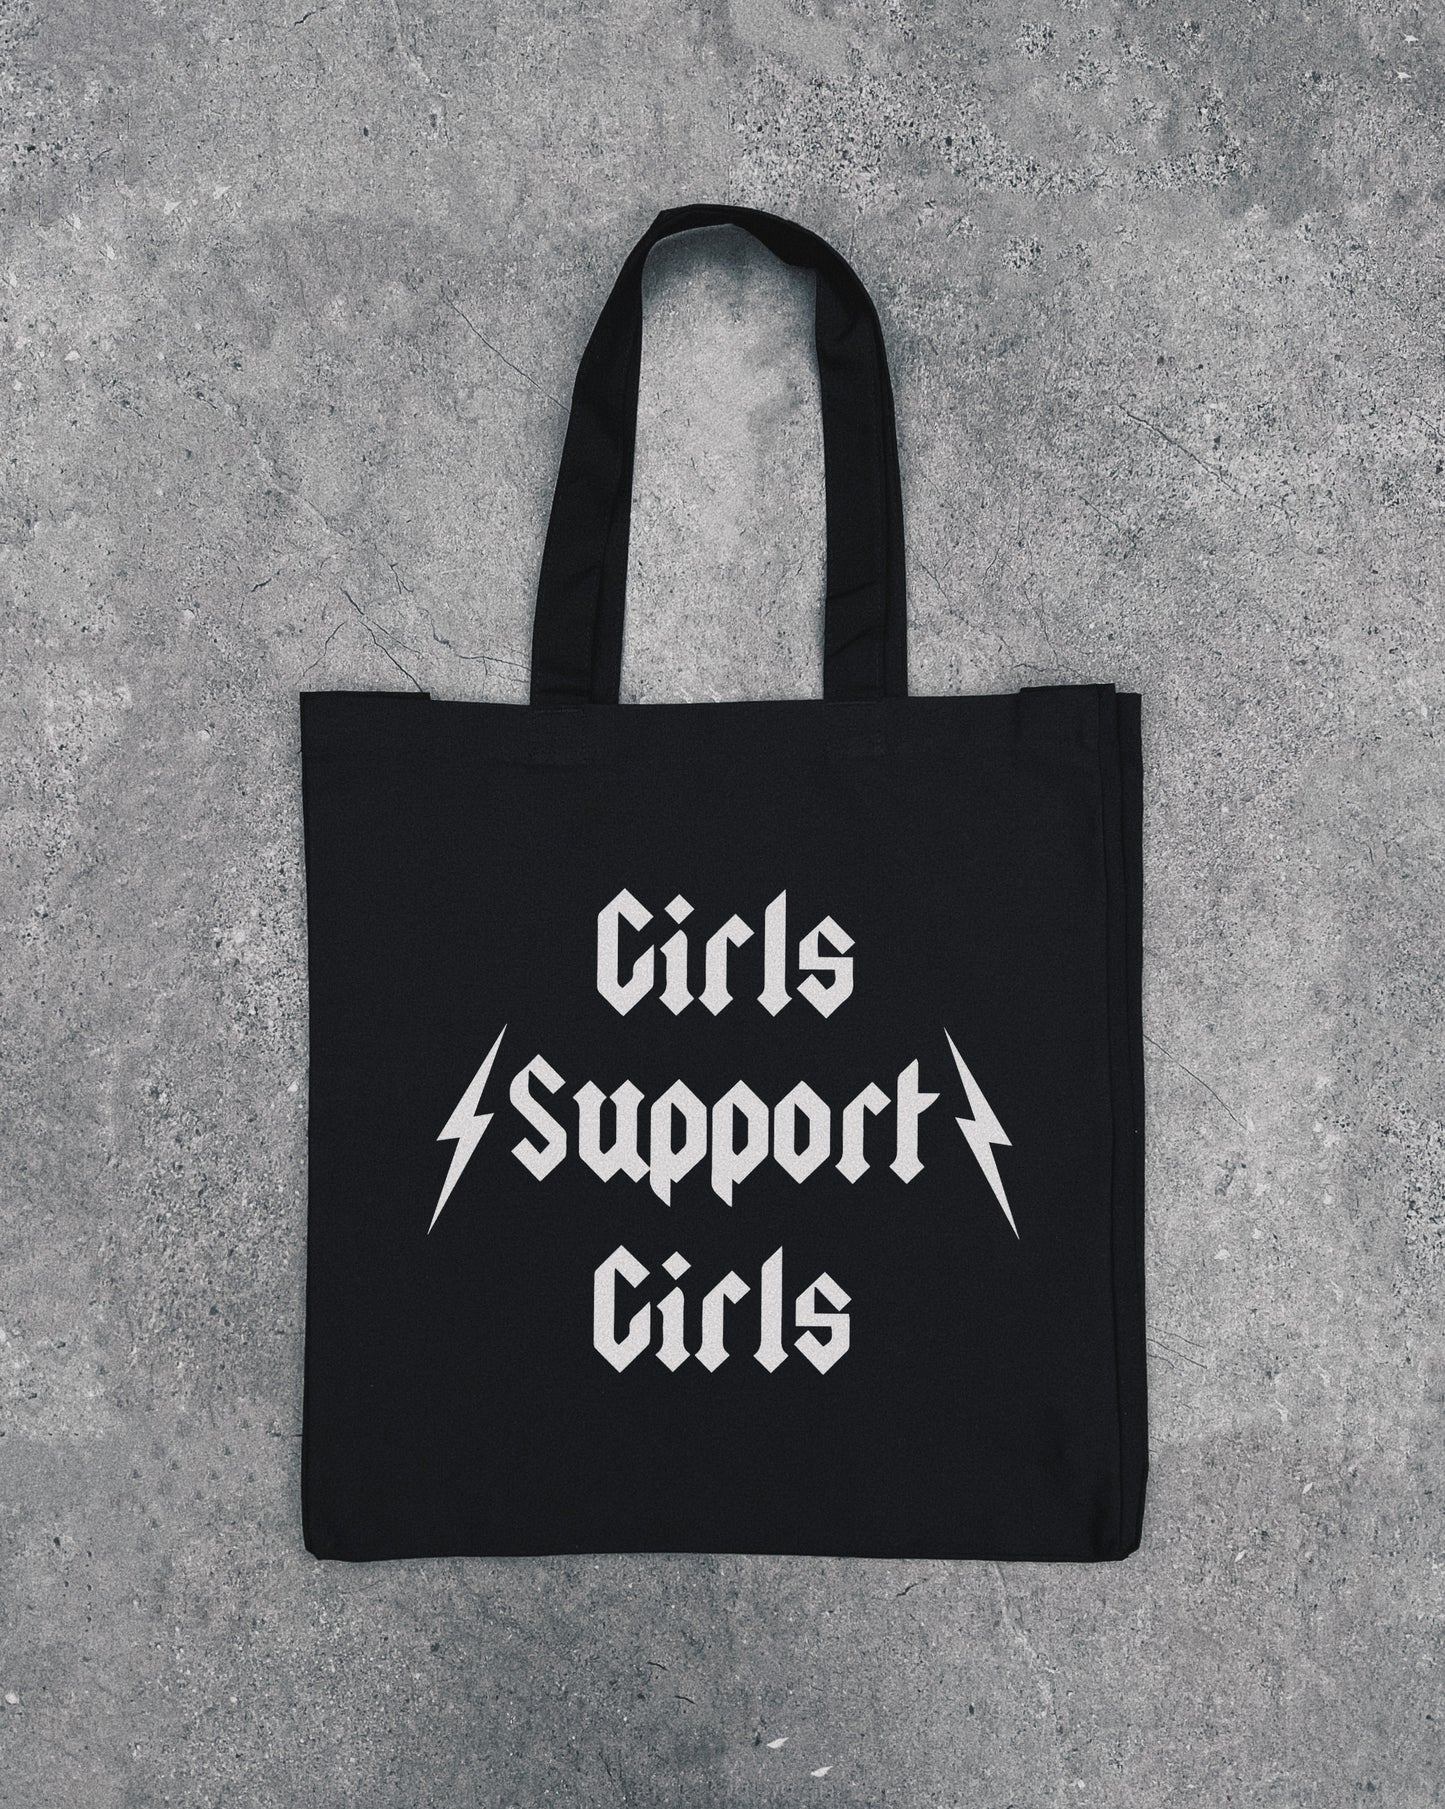 Girls Support Girls - Tote Bag